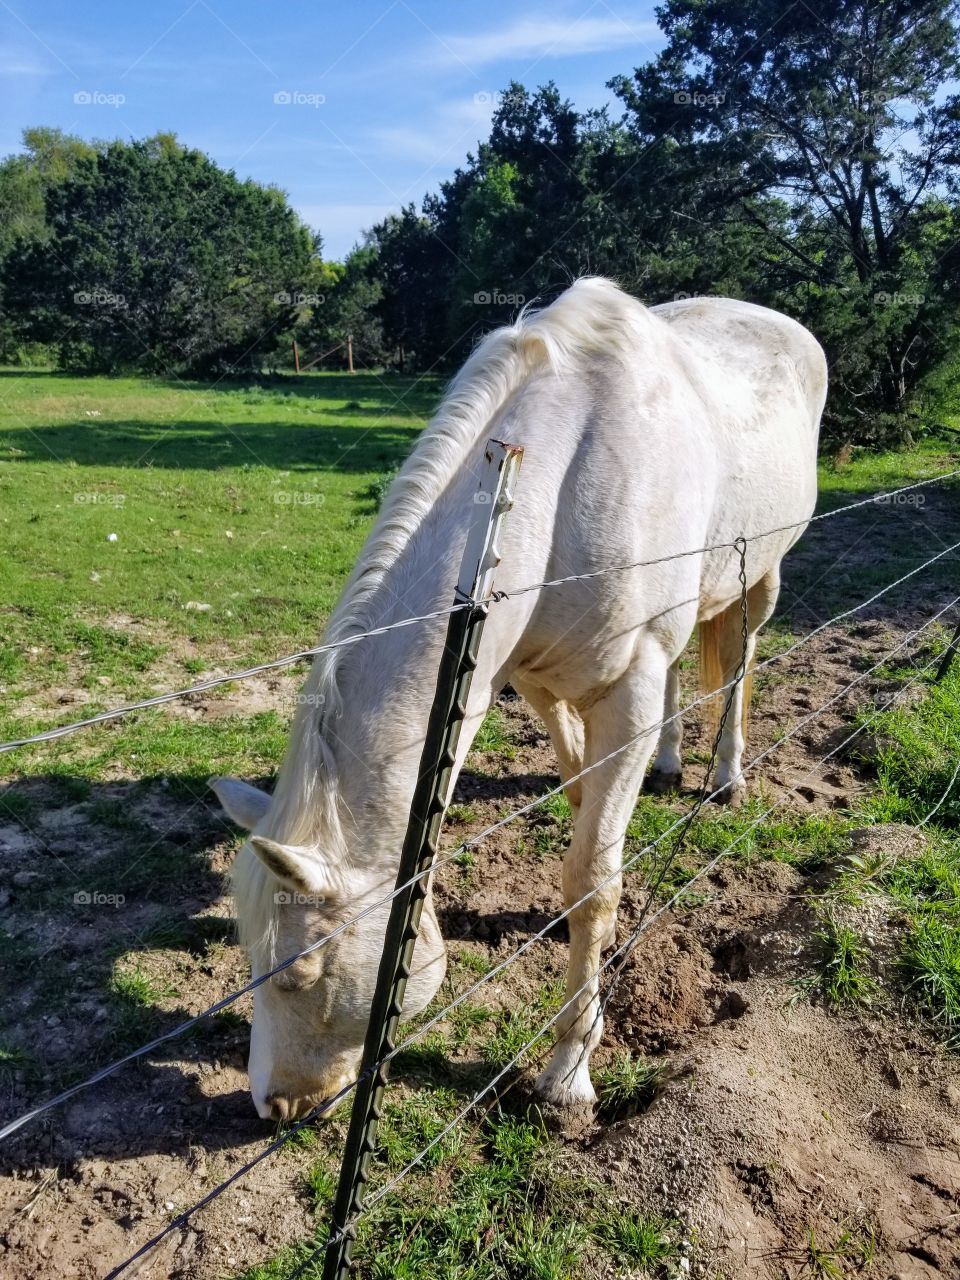 White horse quietly munching on grass in Texas.